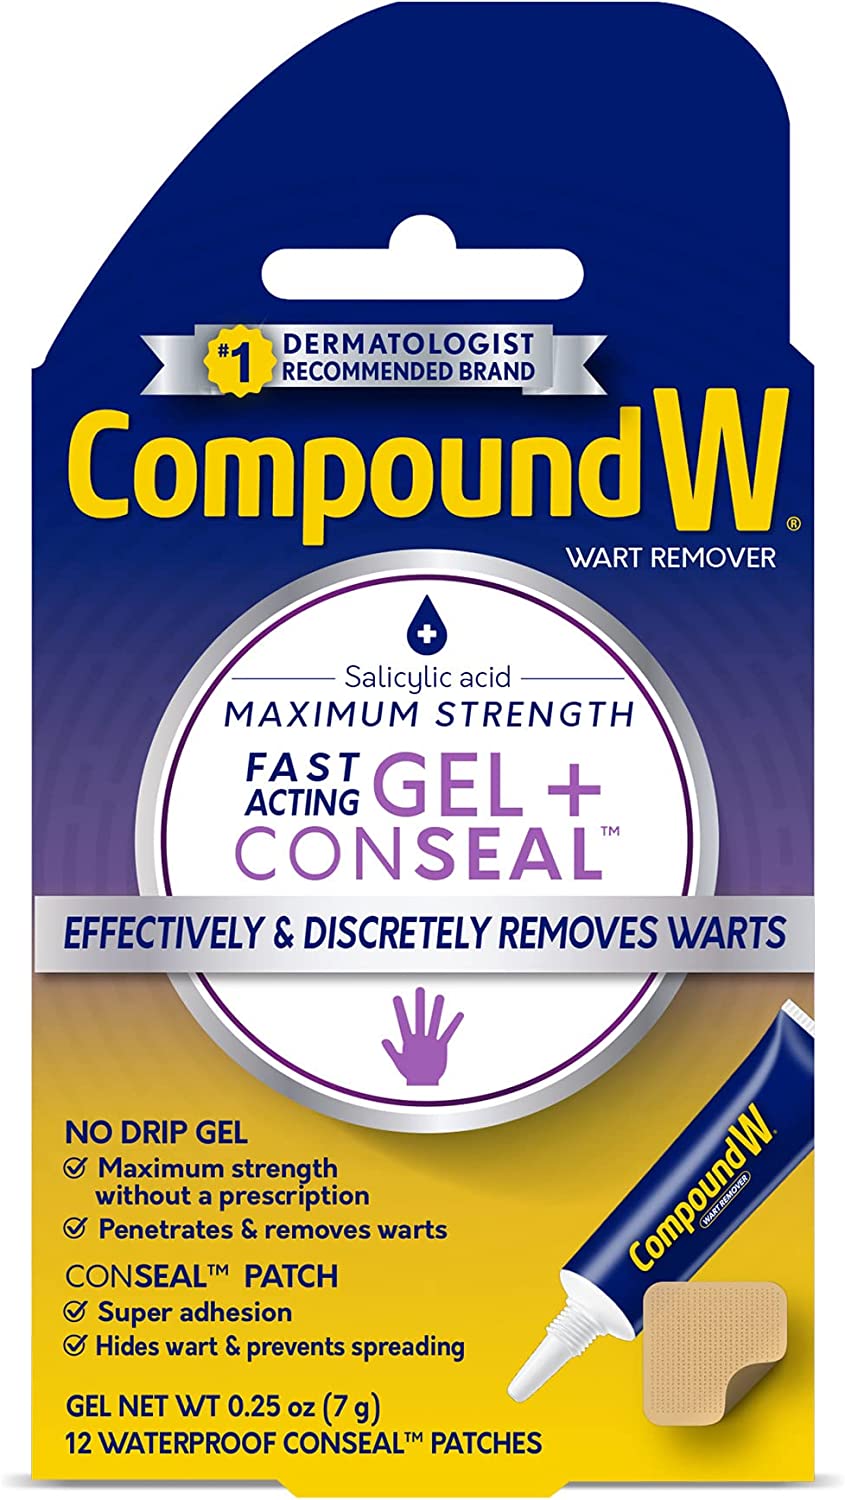 Compound W Maximum Strength One Step Plantar Wart Remover Foot